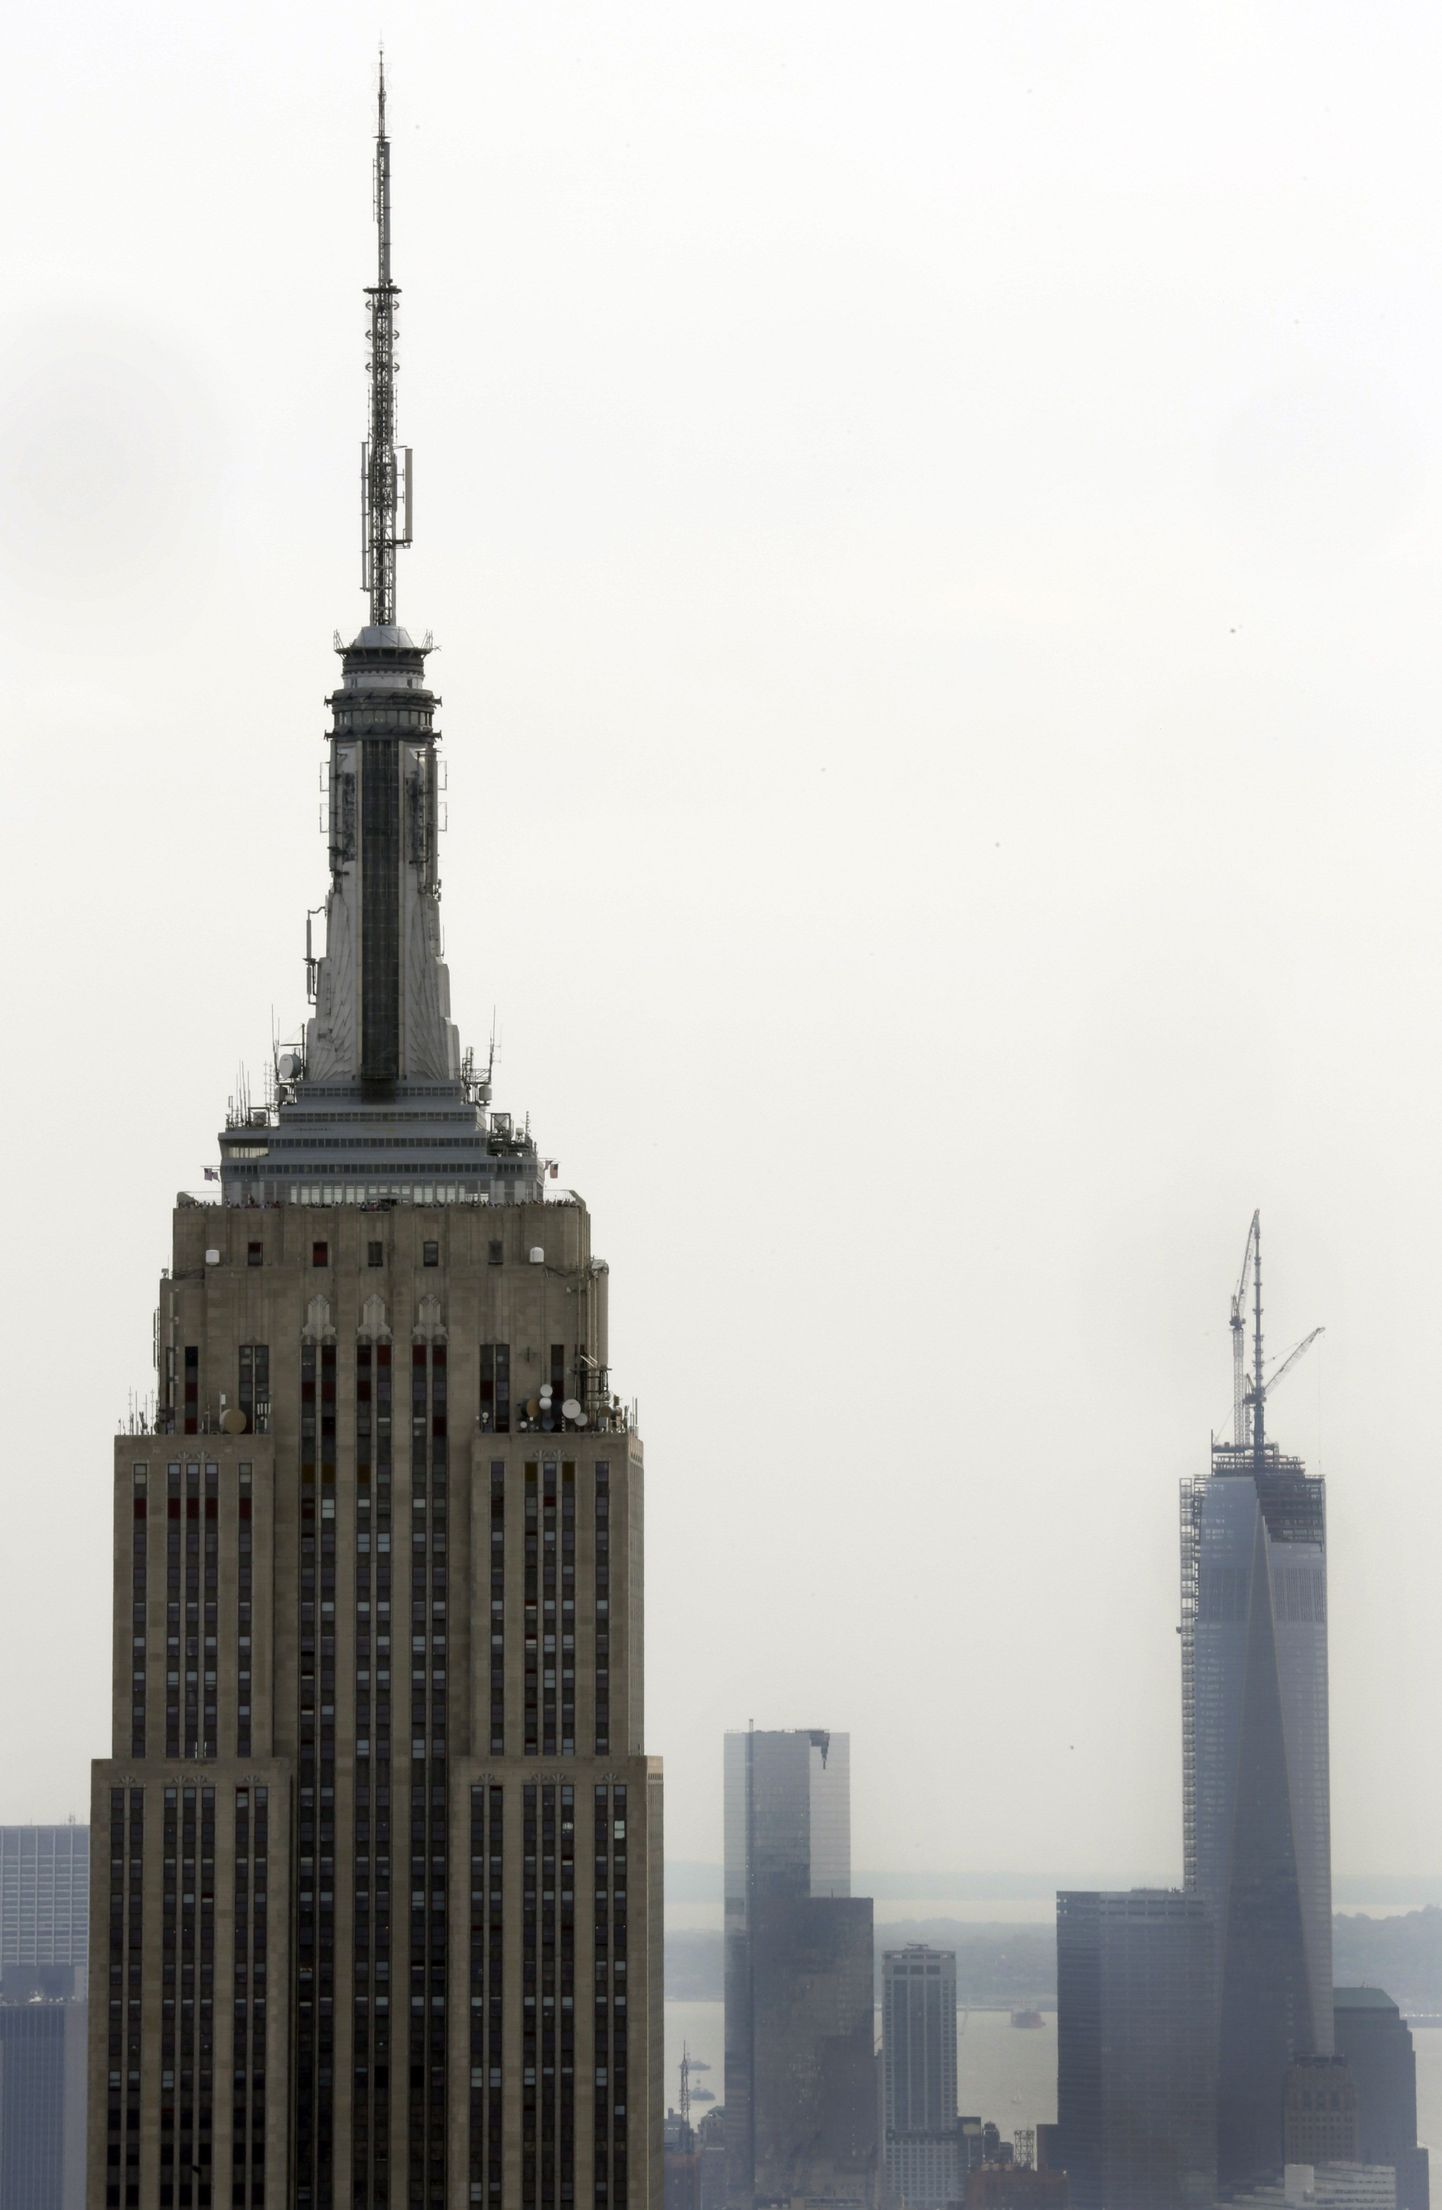 The 1,454-foot Empire State Building, left, and the 1,776-foot One World Trade Center, right, are shown in this photo from New York"s Top of the Rock Observation Deck at Rockefeller Center,  Friday, May 10, 2013. A tall, heavy spire was fully installed atop One World Trade Center on Friday, bringing the New York City structure to its symbolic height of 1,776 feet. The installation makes One World Trade Center the tallest skyscraper in the U.S. and third-tallest in the world, although building experts dispute whether the spire is actually an antenna Ñ a crucial distinction in measuring the building's height. (AP Photo/Richard Drew) / SCANPIX Code: 436